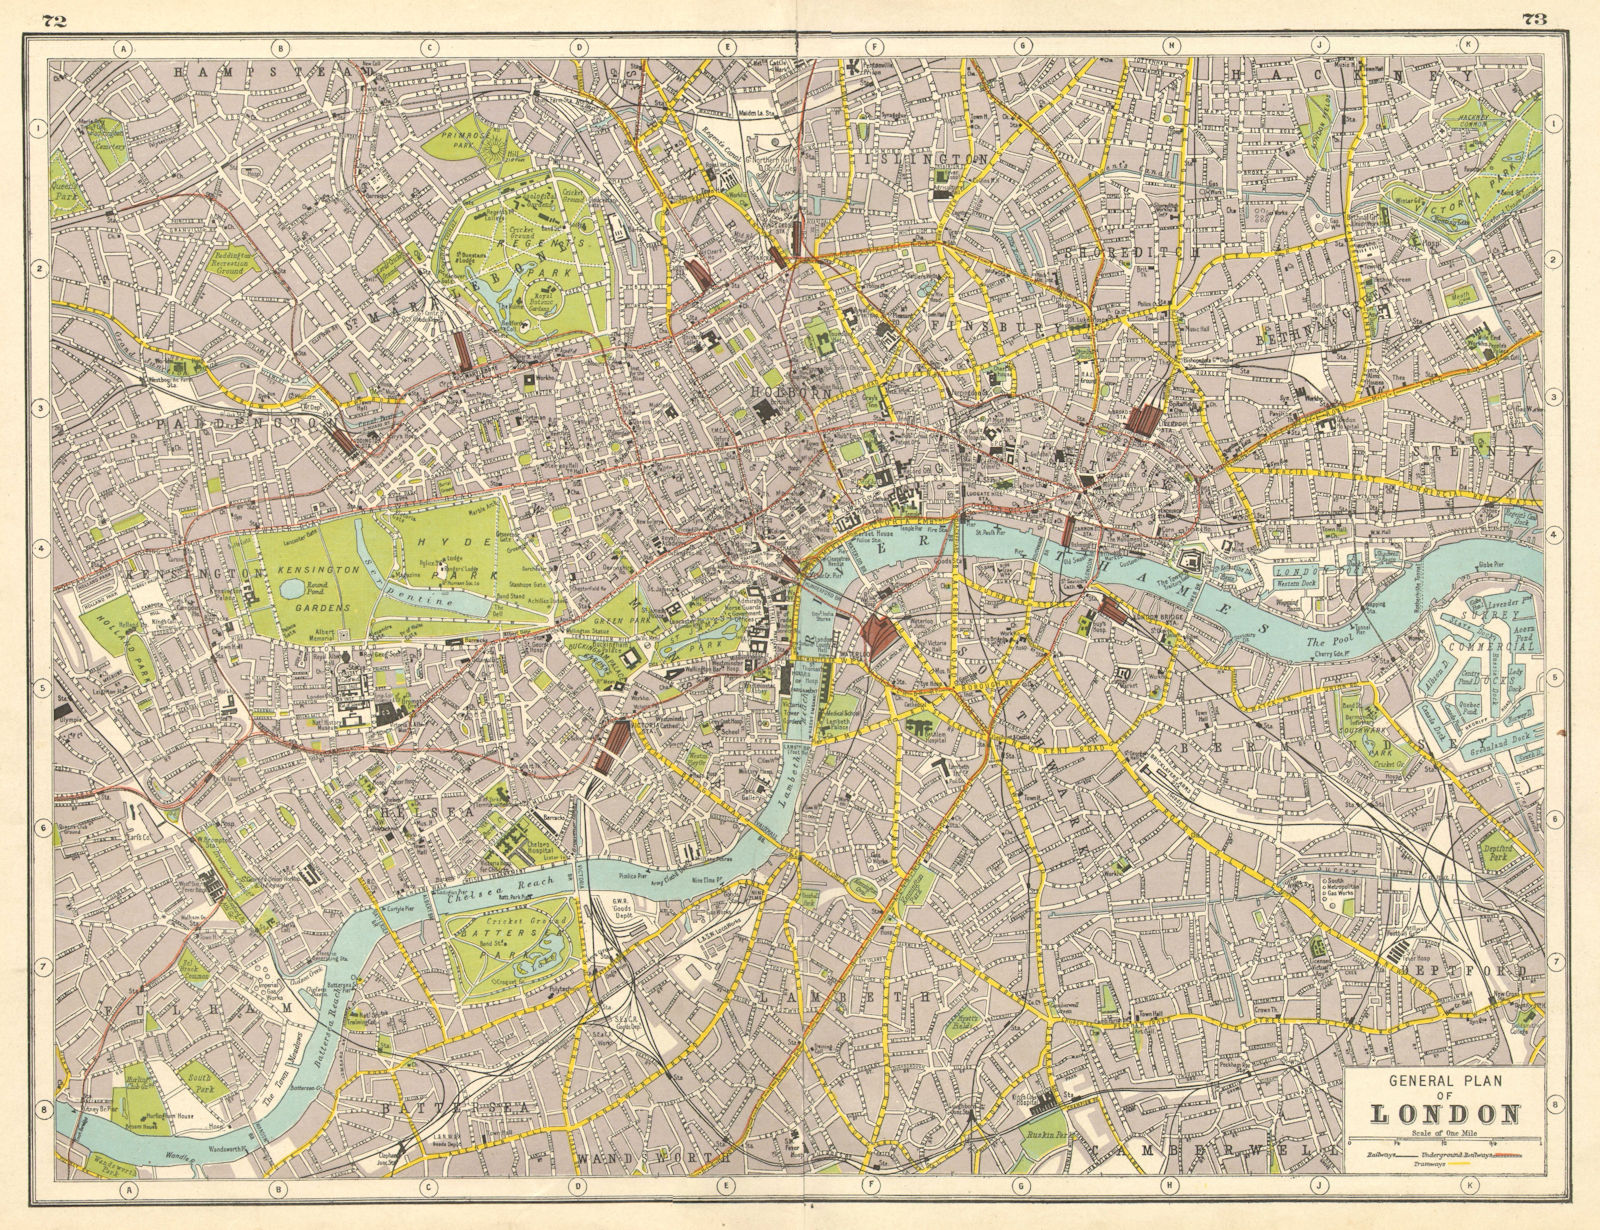 Associate Product LONDON. Central London plan. HARMSWORTH 1920 old antique map chart